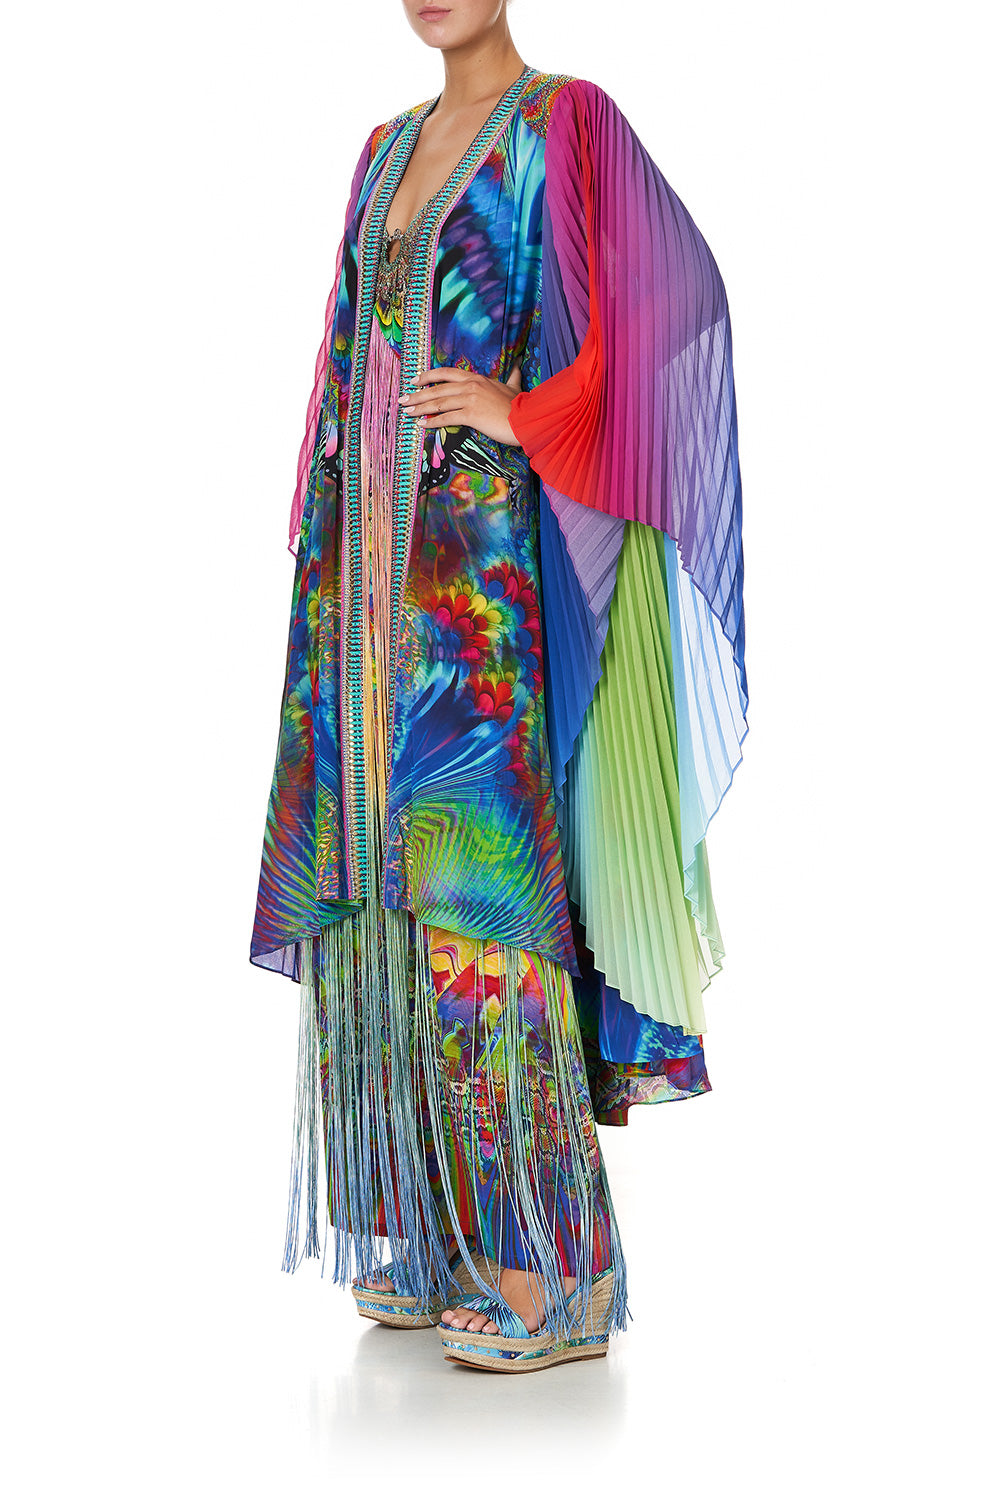 DRAMATIC PLEATED LAYER HYPED UP HIPPIE